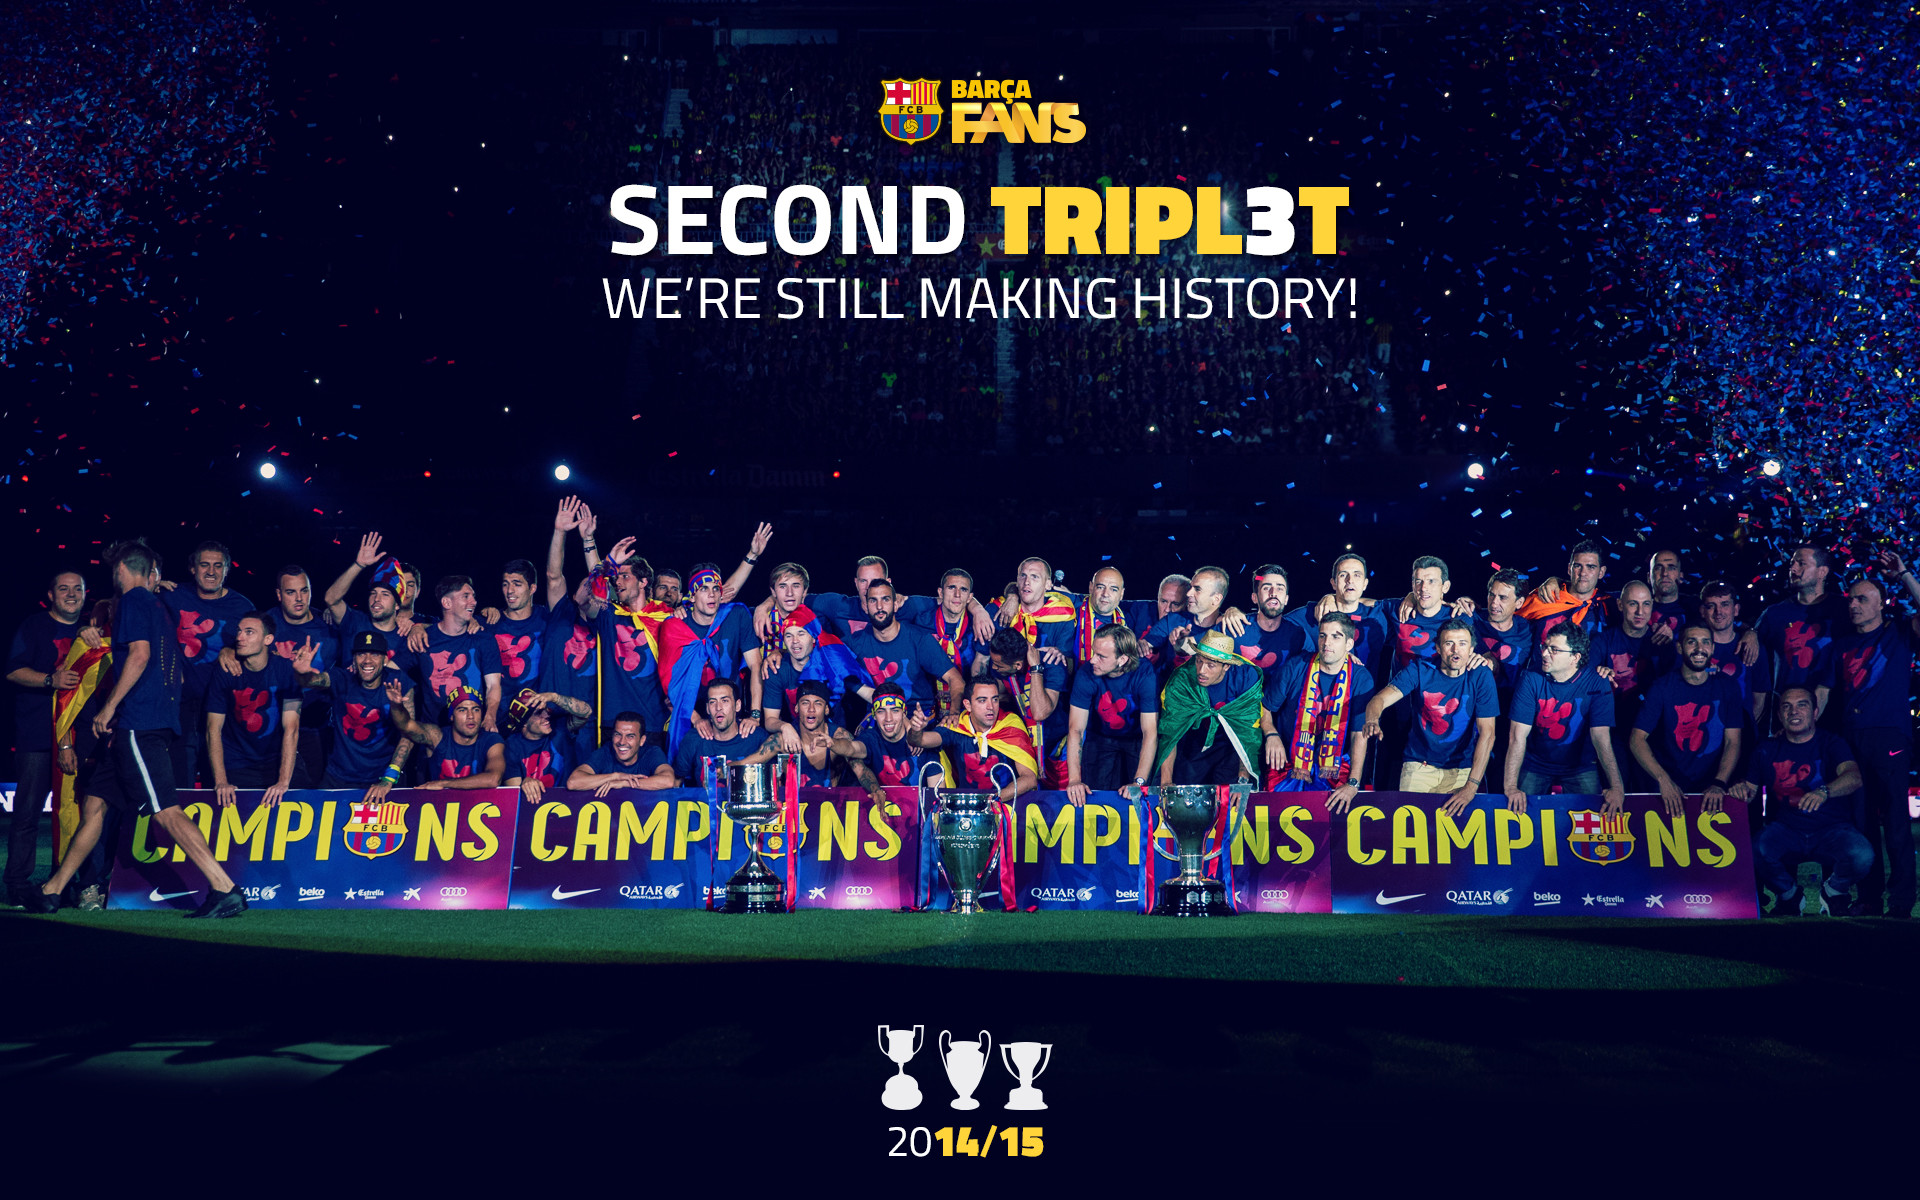 1920x1200 Second #TRIPL3T ; we're still making history! | My SOCCER obsession <333 |  Pinterest | FC Barcelona, Uefa champions league and Wallpaper